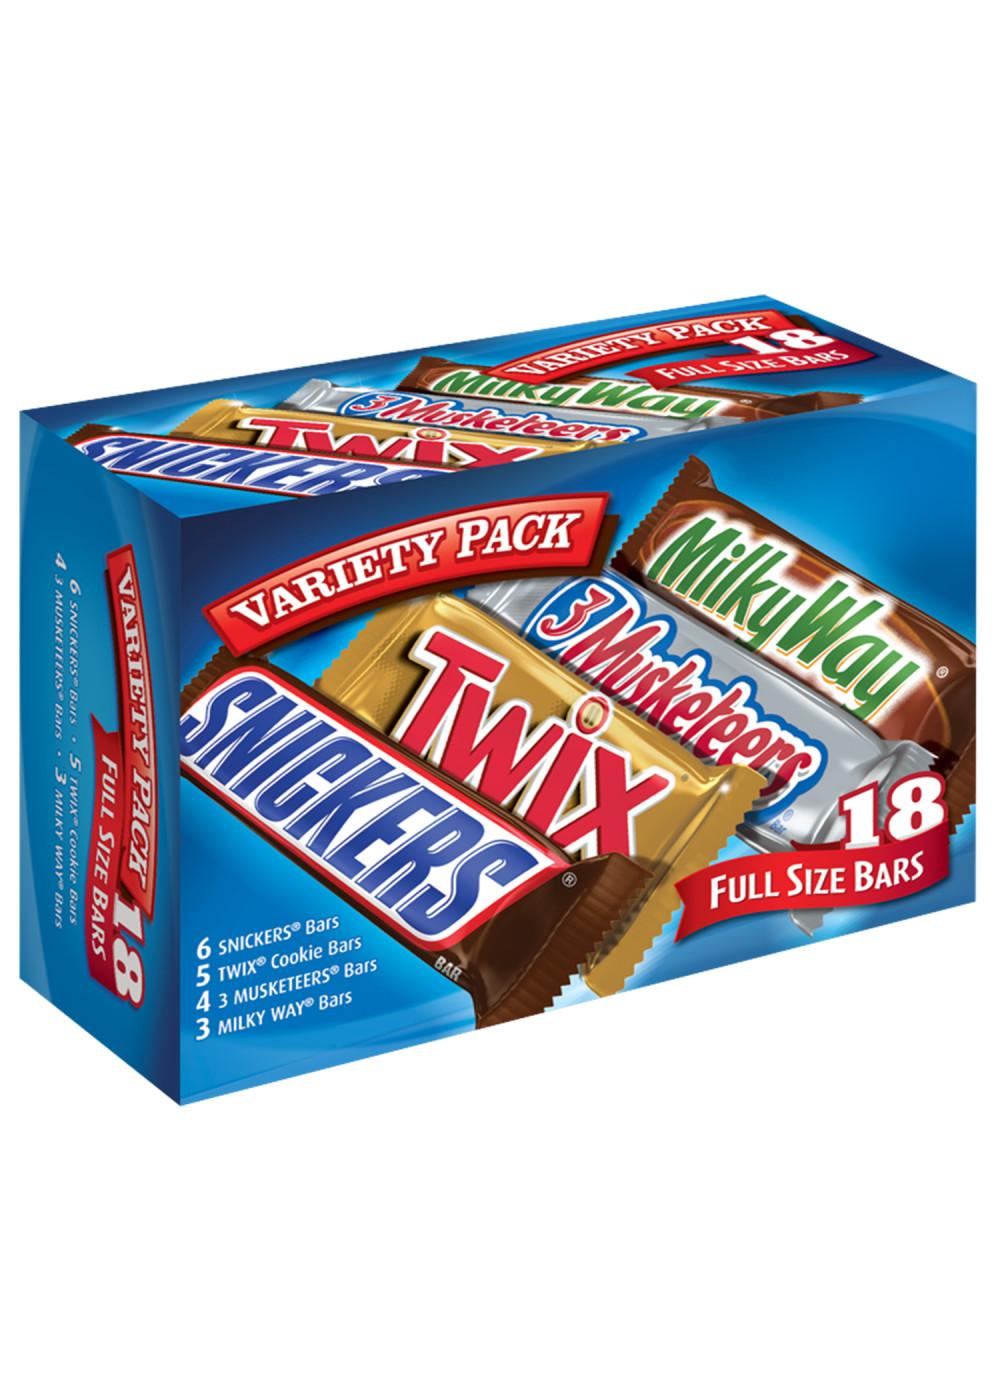 Mars Wrigley  Assorted Full Size Chocolate Candy Bars - Variety Pack; image 2 of 11